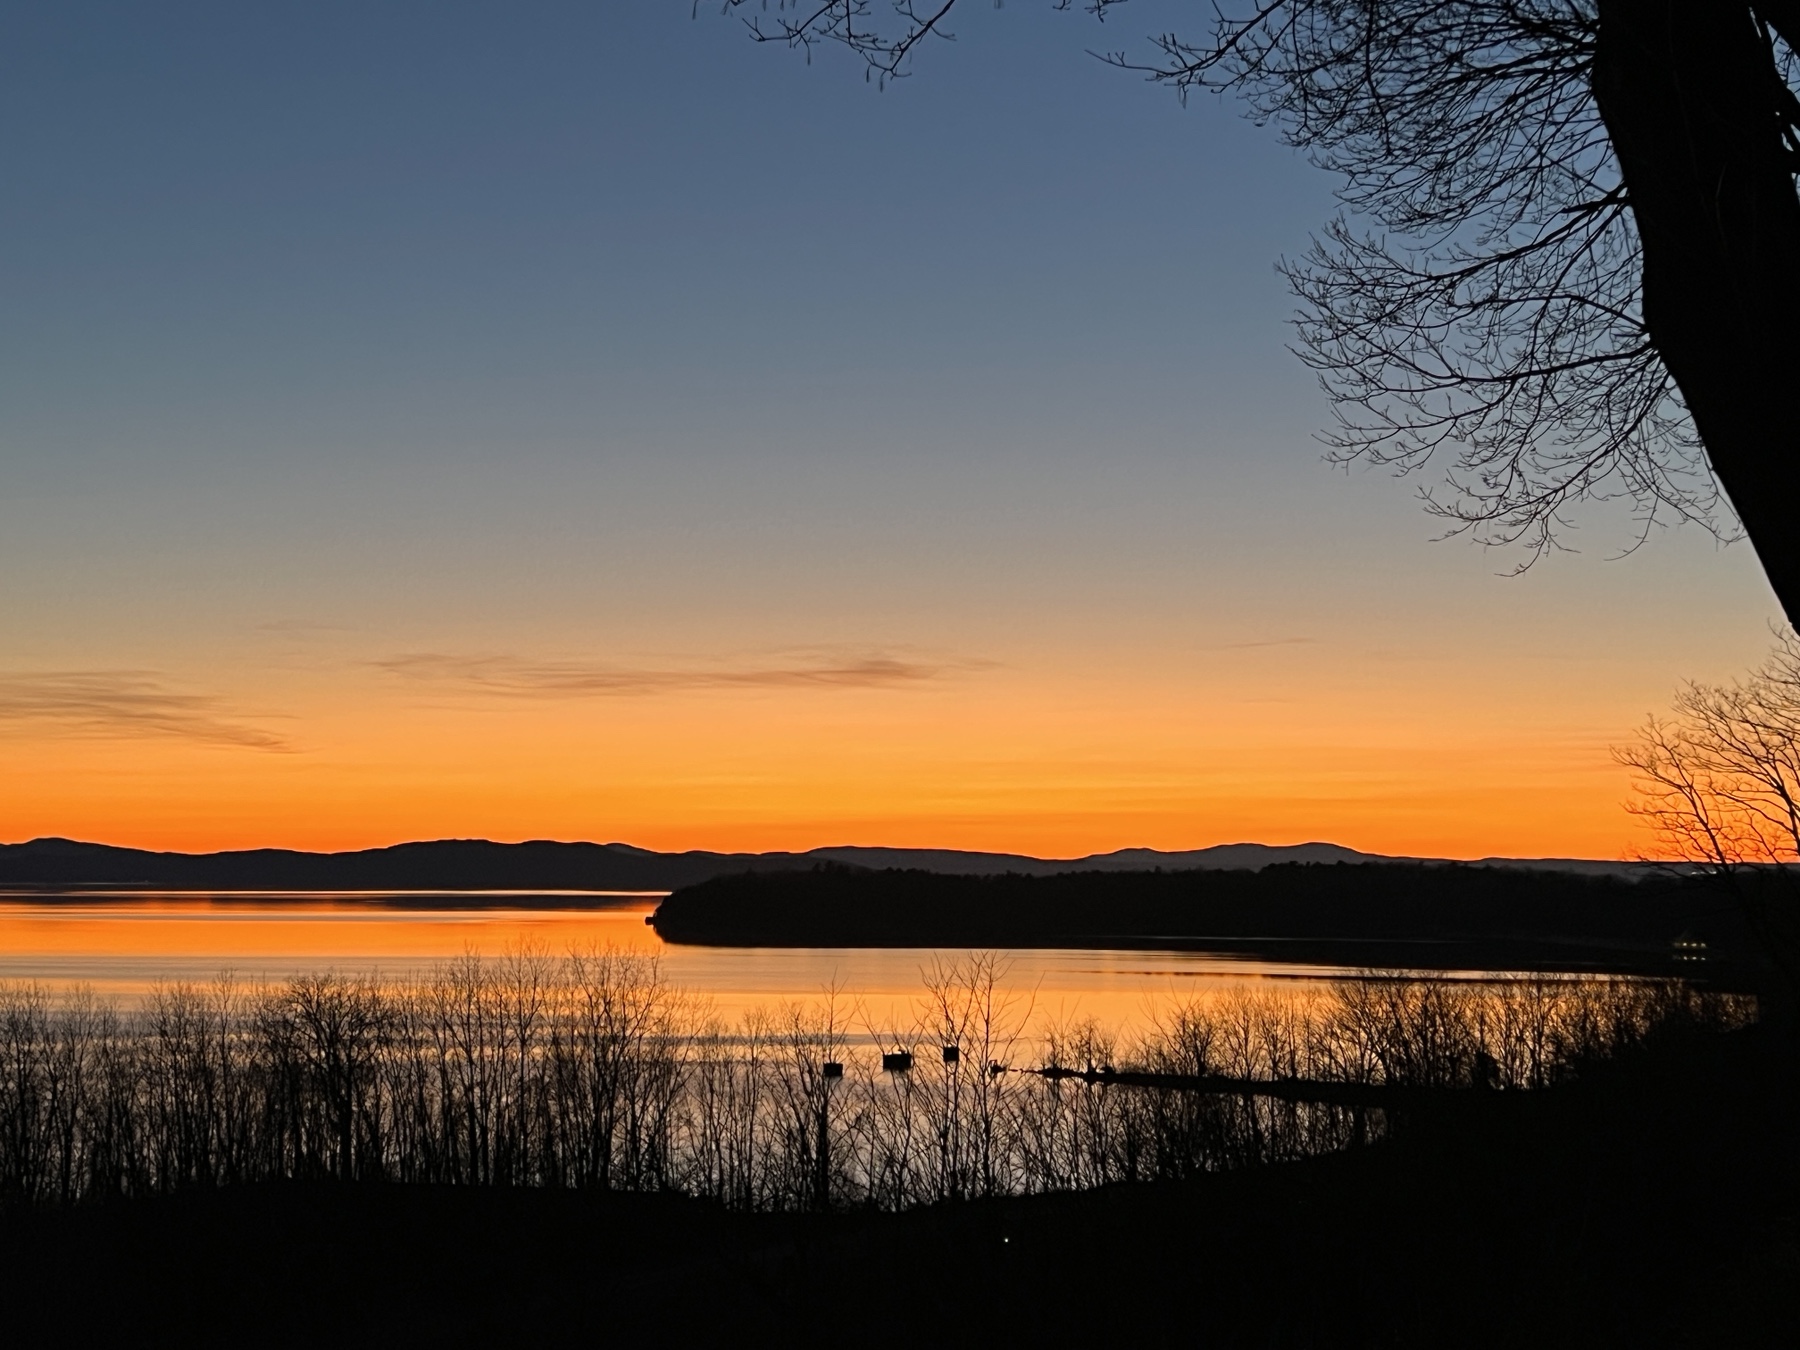 sunset view of Lake Champlain from Burlington with silhouetted shoreline and trees in foreground and mountains on the far shore